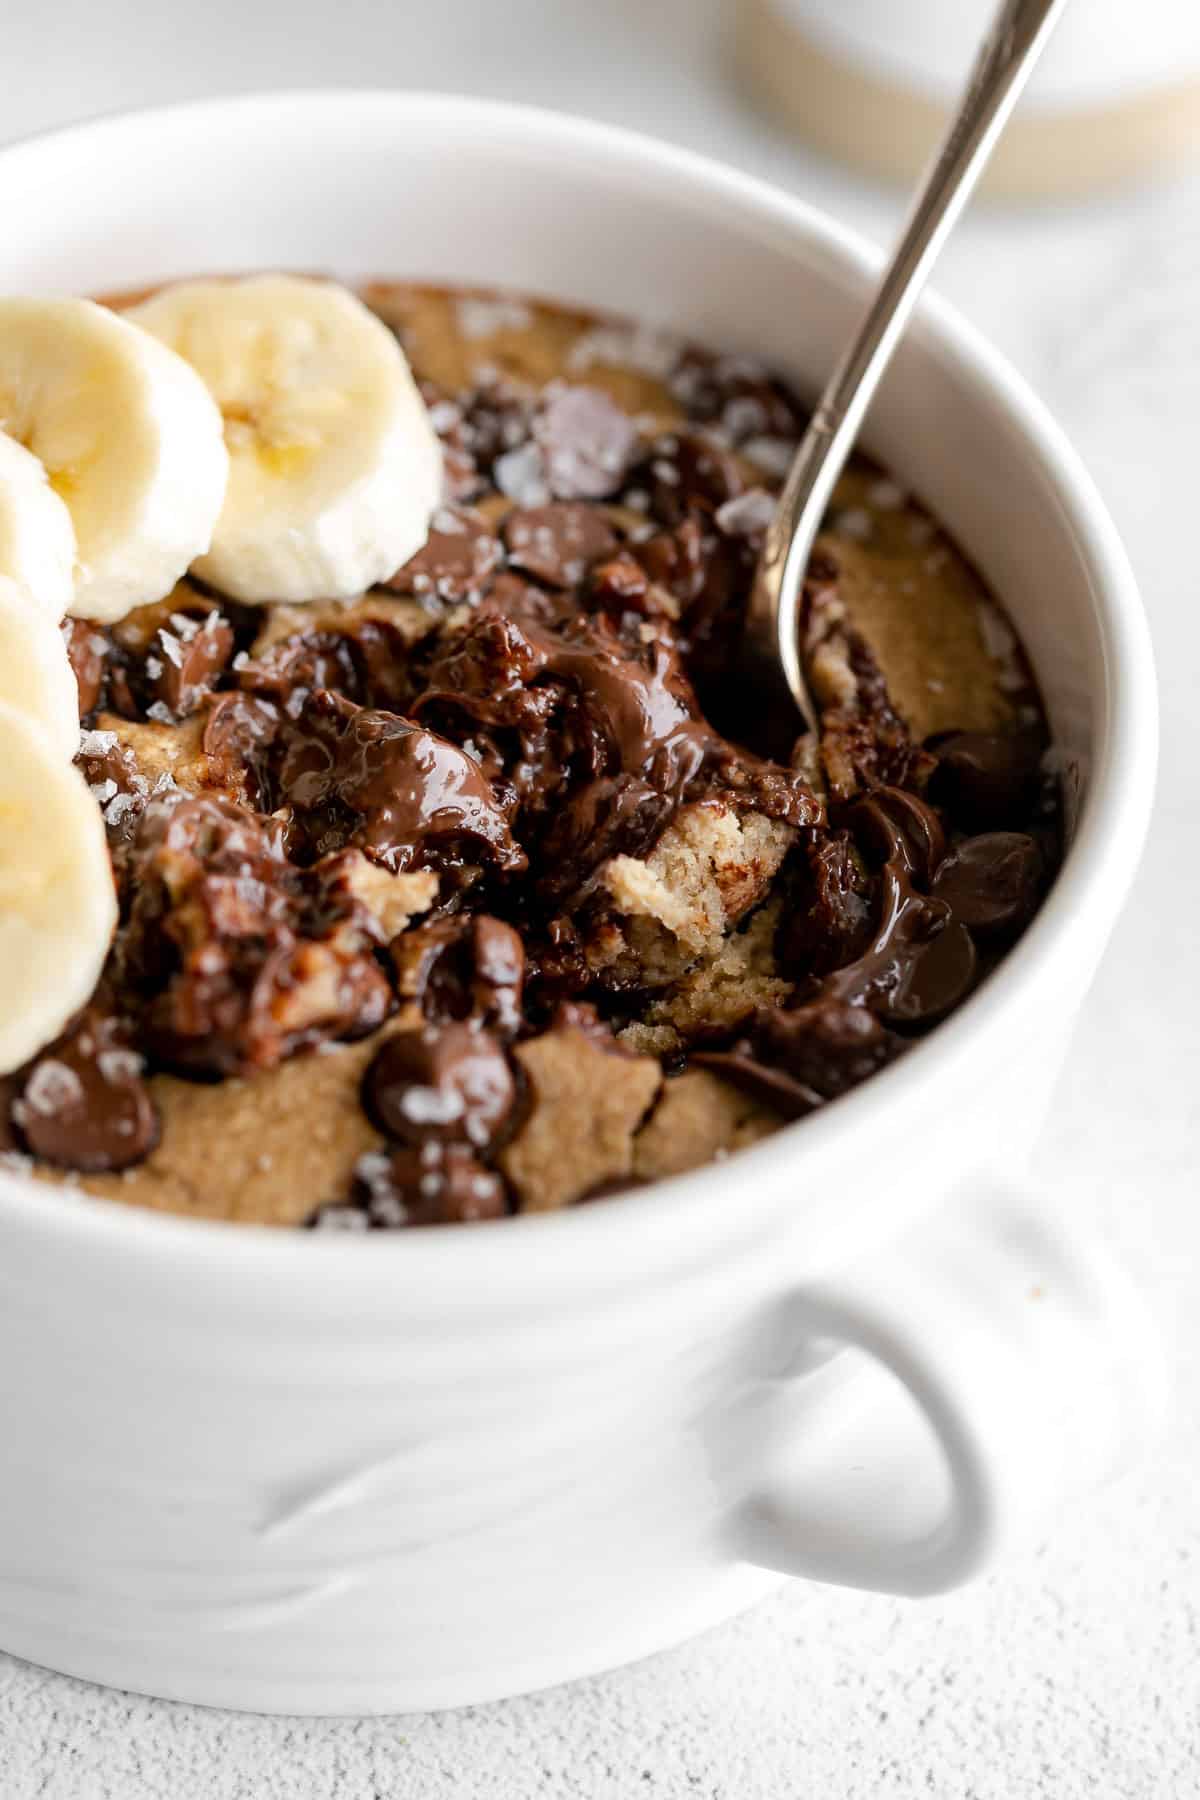 up close image of the blended baked protein oats with chocolate chips and banana